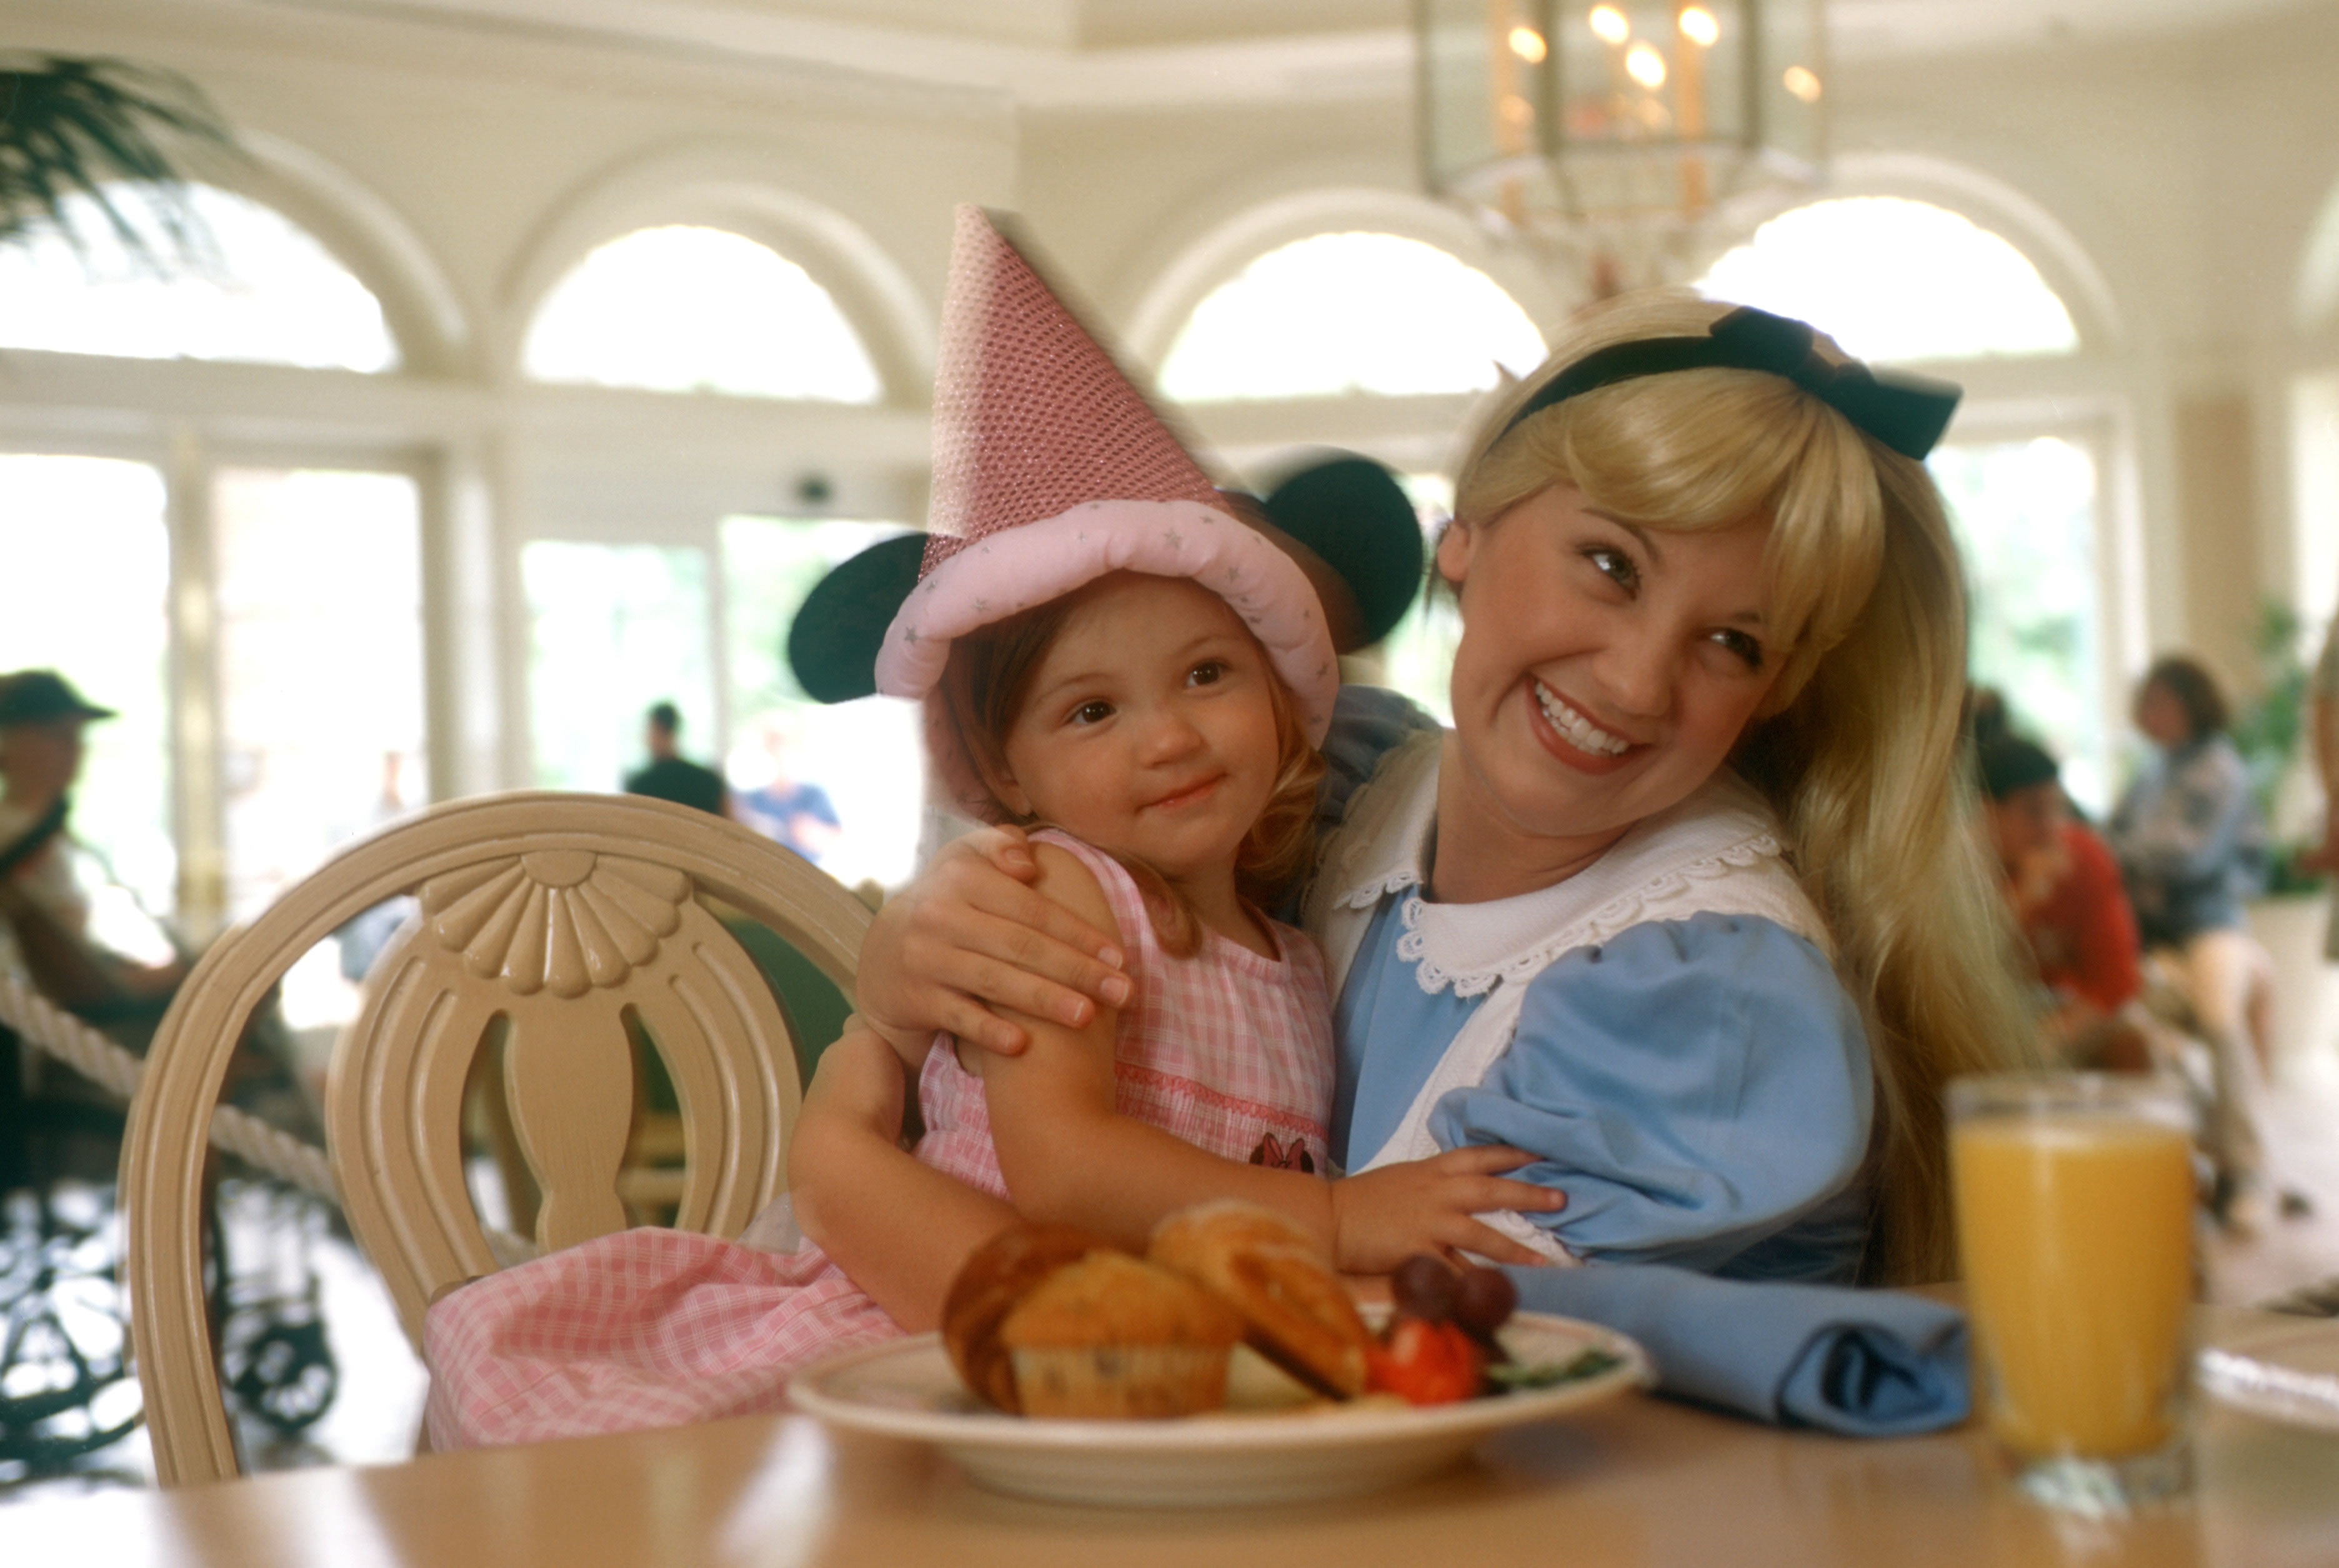 Disney Visa Free Dining 2012 Available for Select Fall Dates | Off to